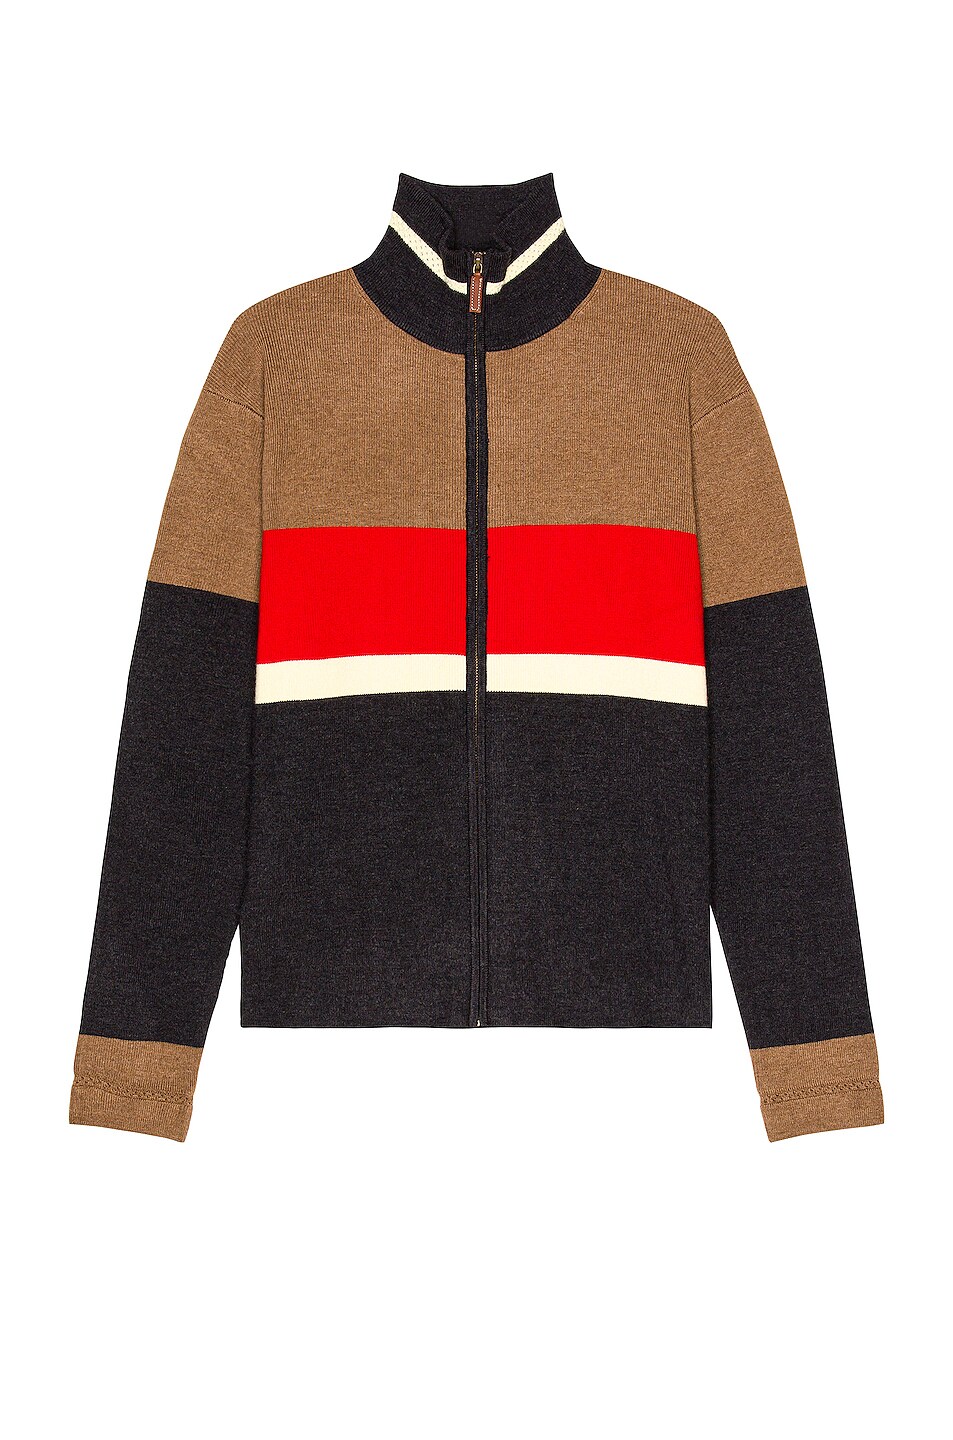 Image 1 of Wales Bonner George Zip Knit Cardigan in Charcoal & Red